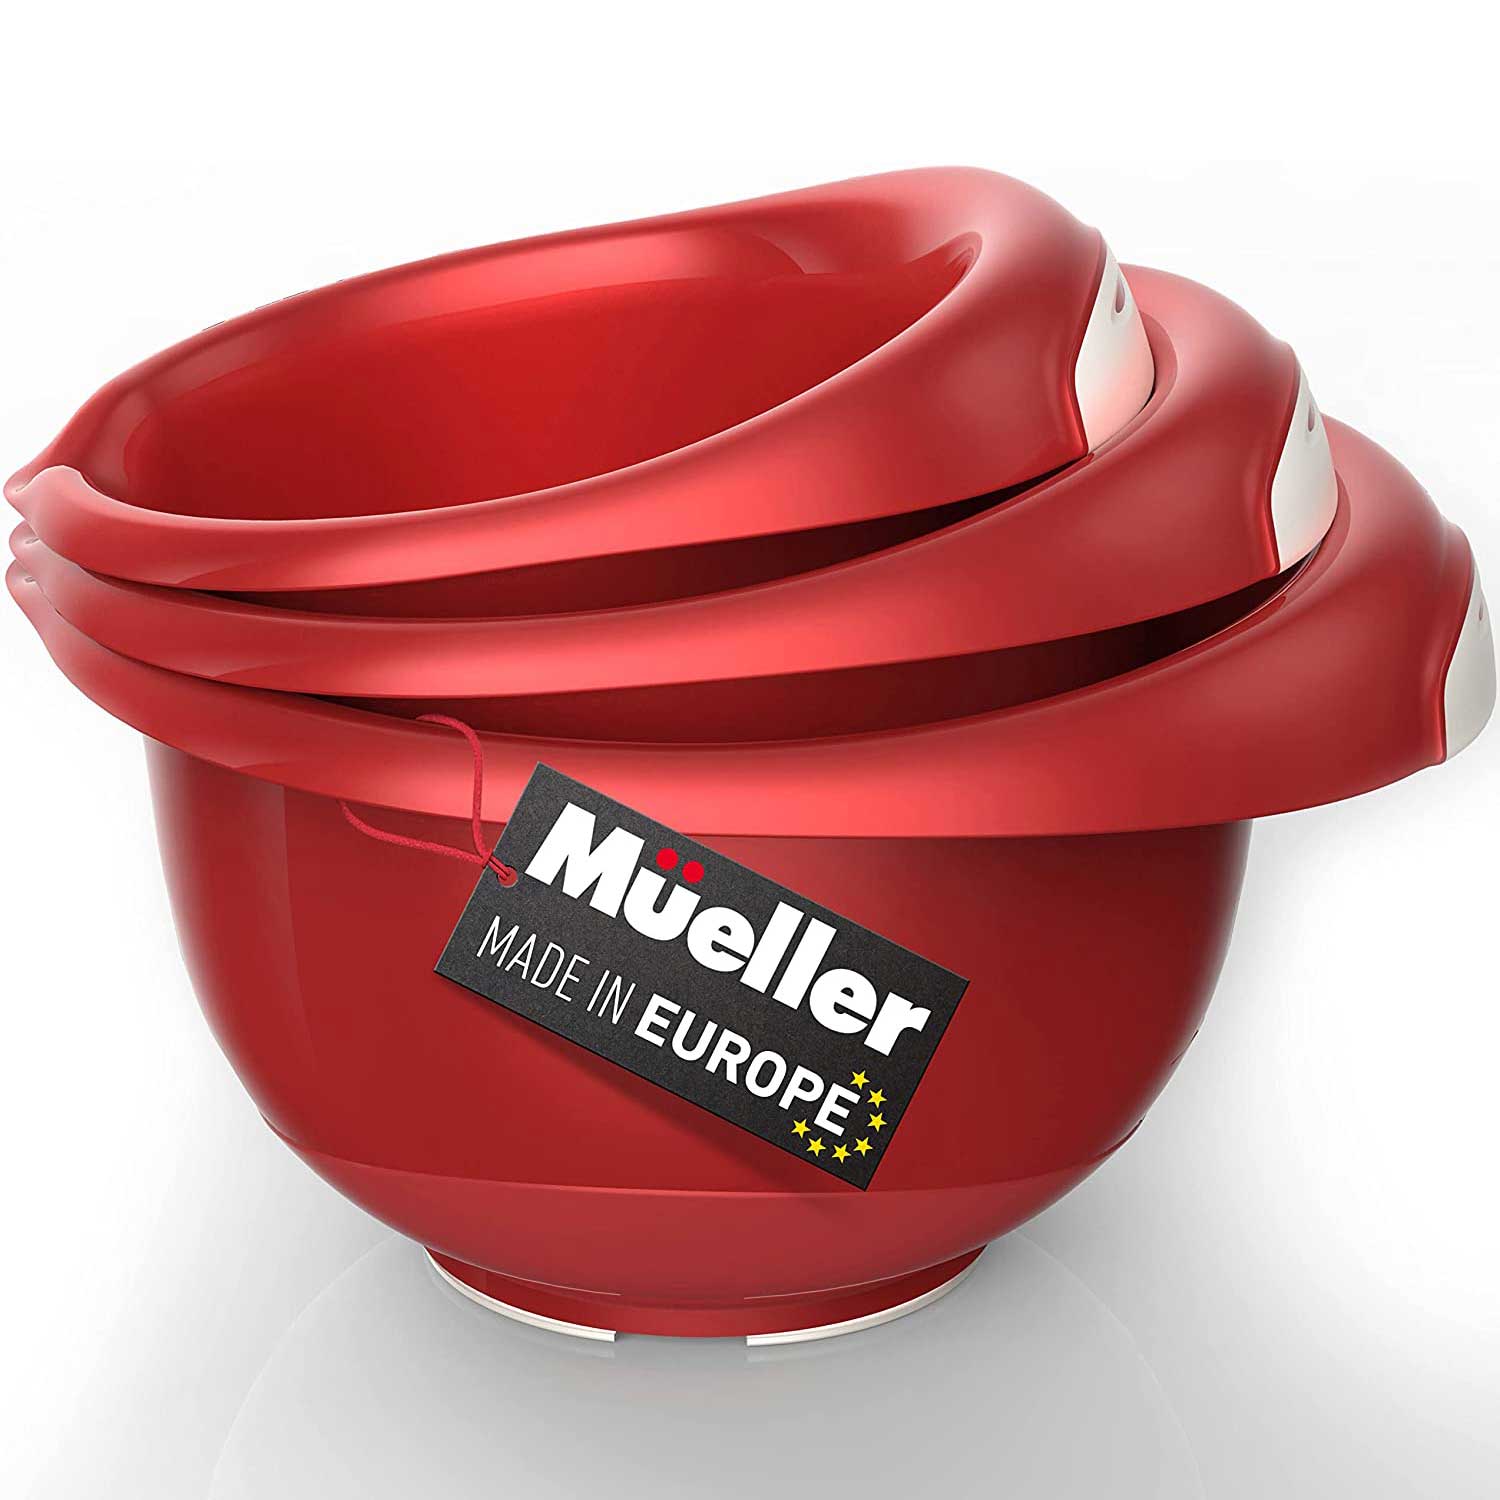 Mullearhome_Superb-Mixing-Bowl-Set-of-3-red